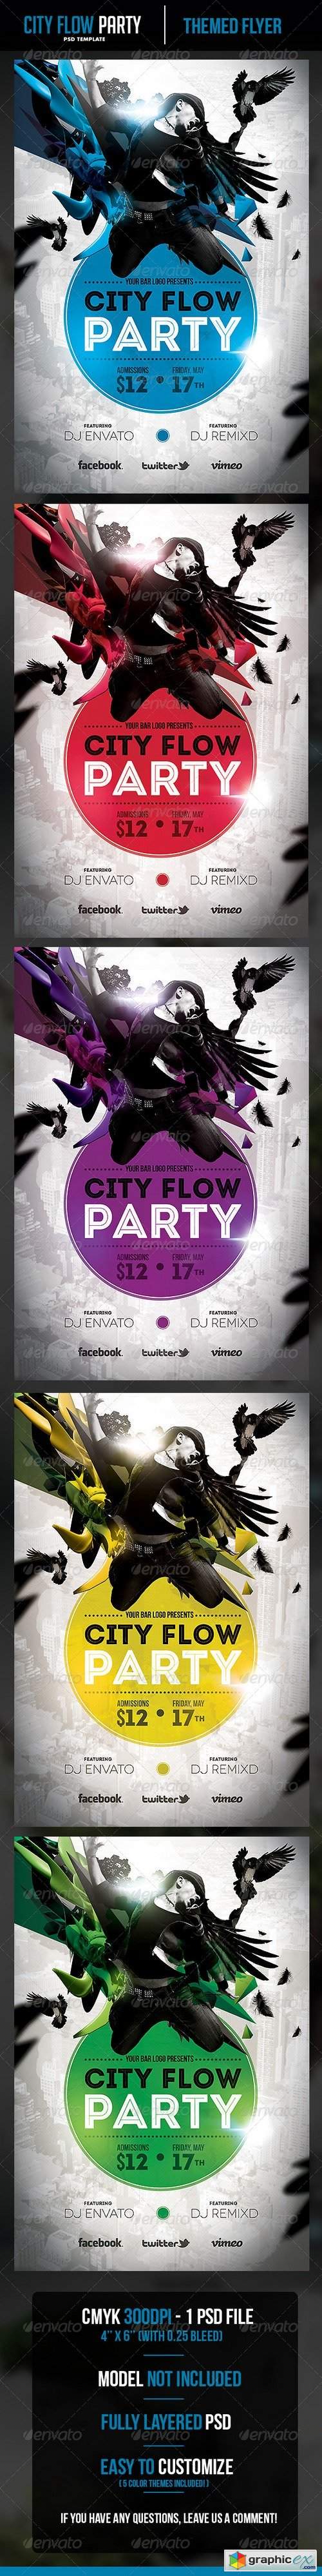 City Flow Party Flyer Template